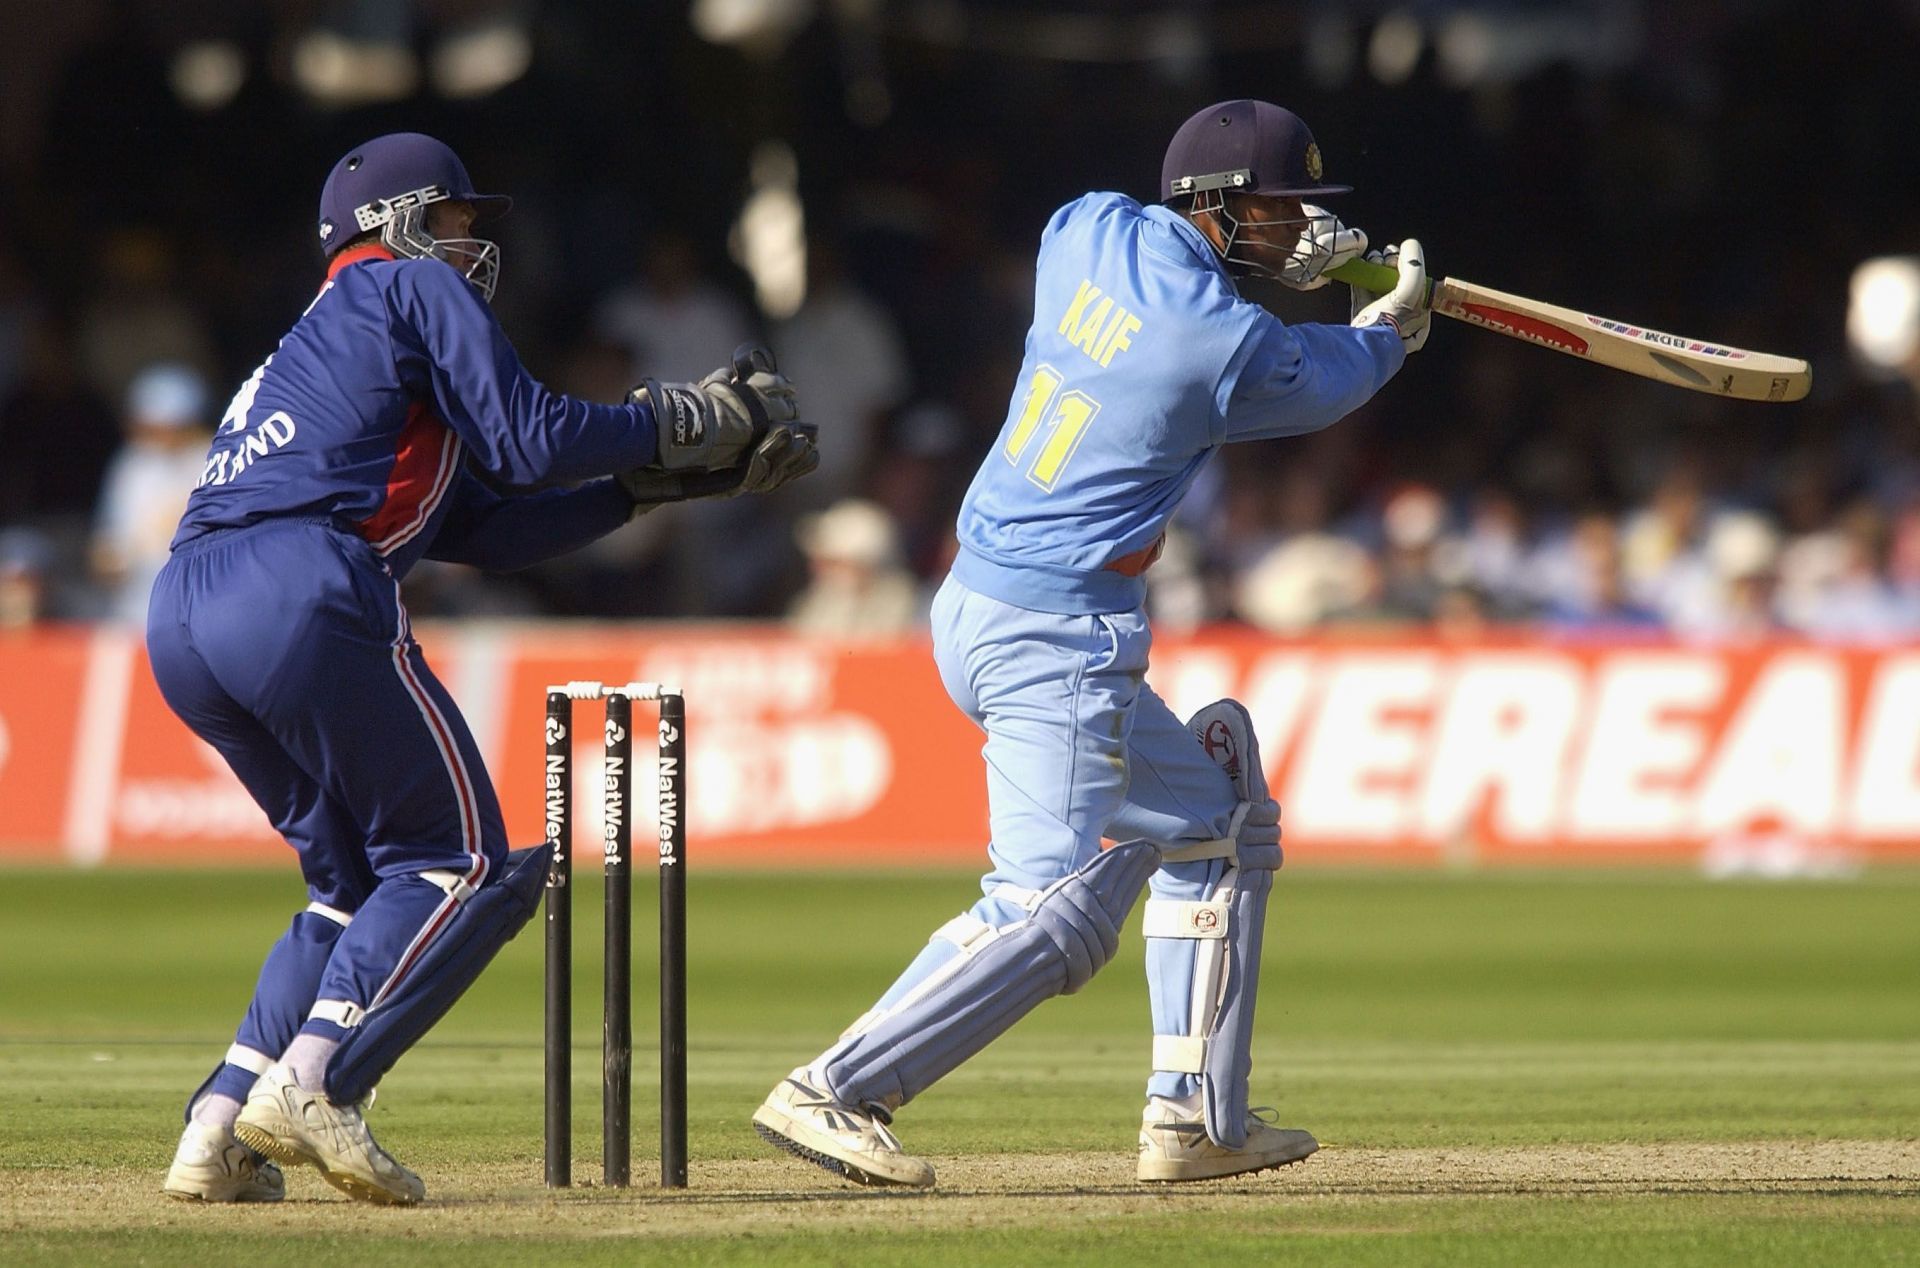 Mohammad Kaif remained unbeaten in the Natwest series final. (Credits: Getty)